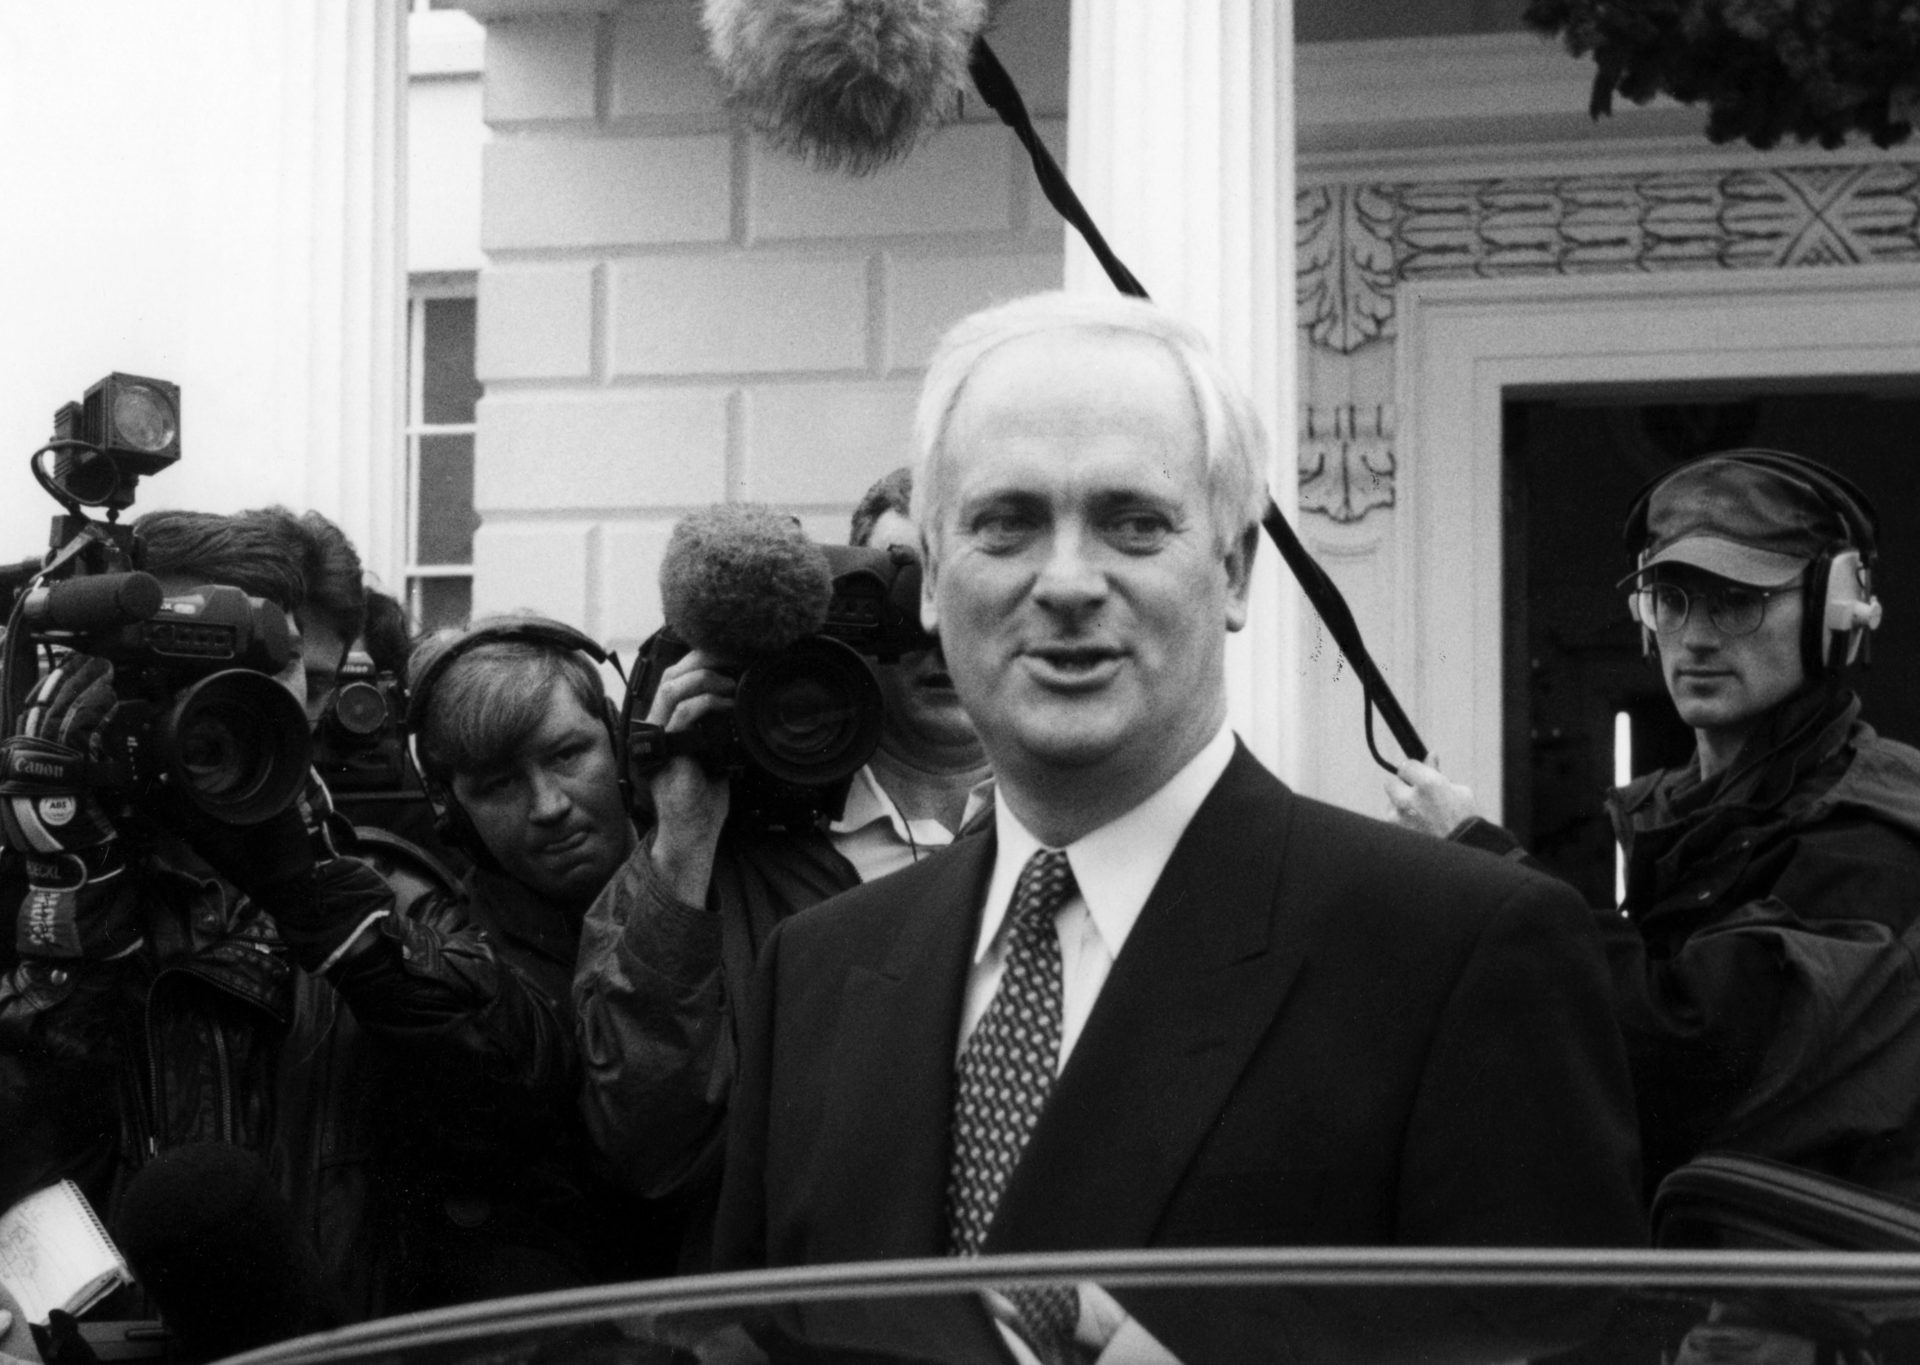 John Bruton leaves Áras an Uachtaráin after receiving his Seal of Office from then-President Mary Robinson, 15-12-94.